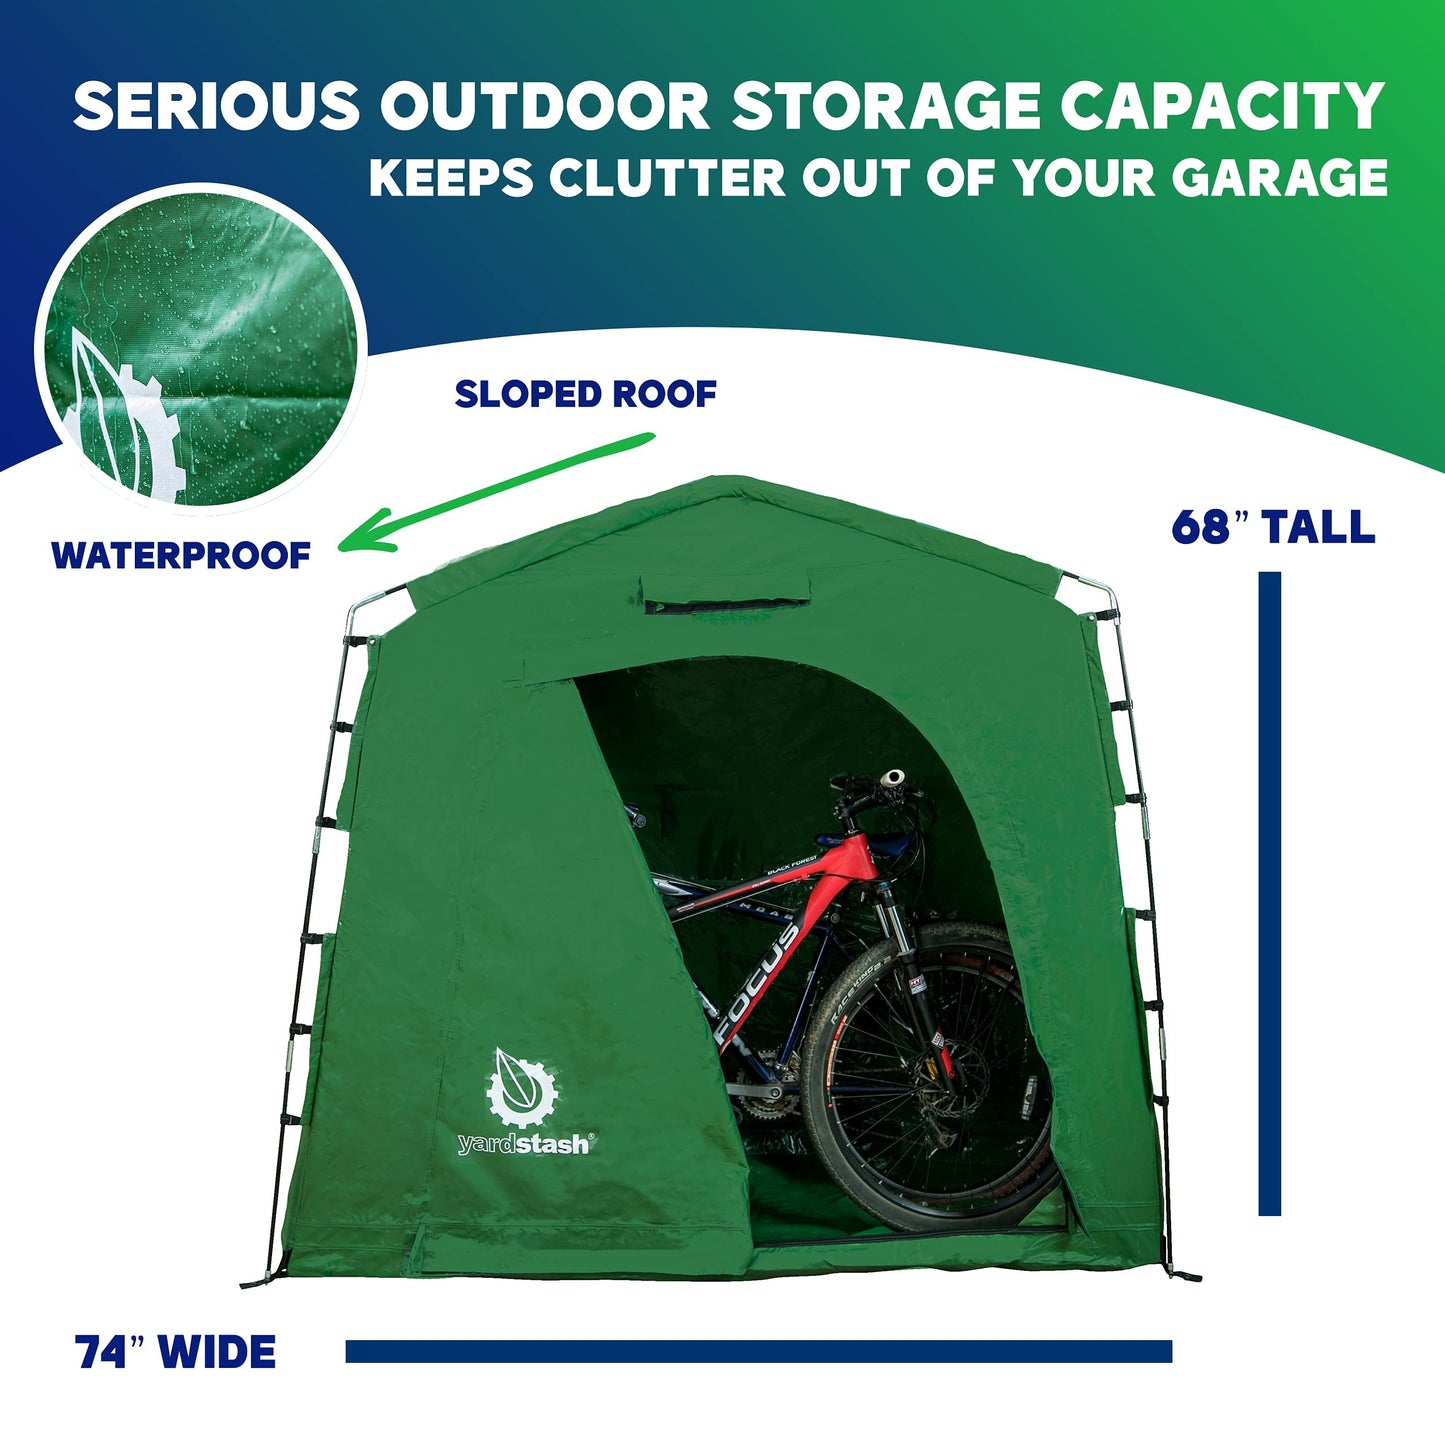 YardStash Bike Storage Tent, Outdoor, Portable Shed Cover for Lawn Mower, Garden Tools for Waterproof, Heavy-Duty Tarp to Protect from Rain, Wind and Snow, Spring Cleaning Essential